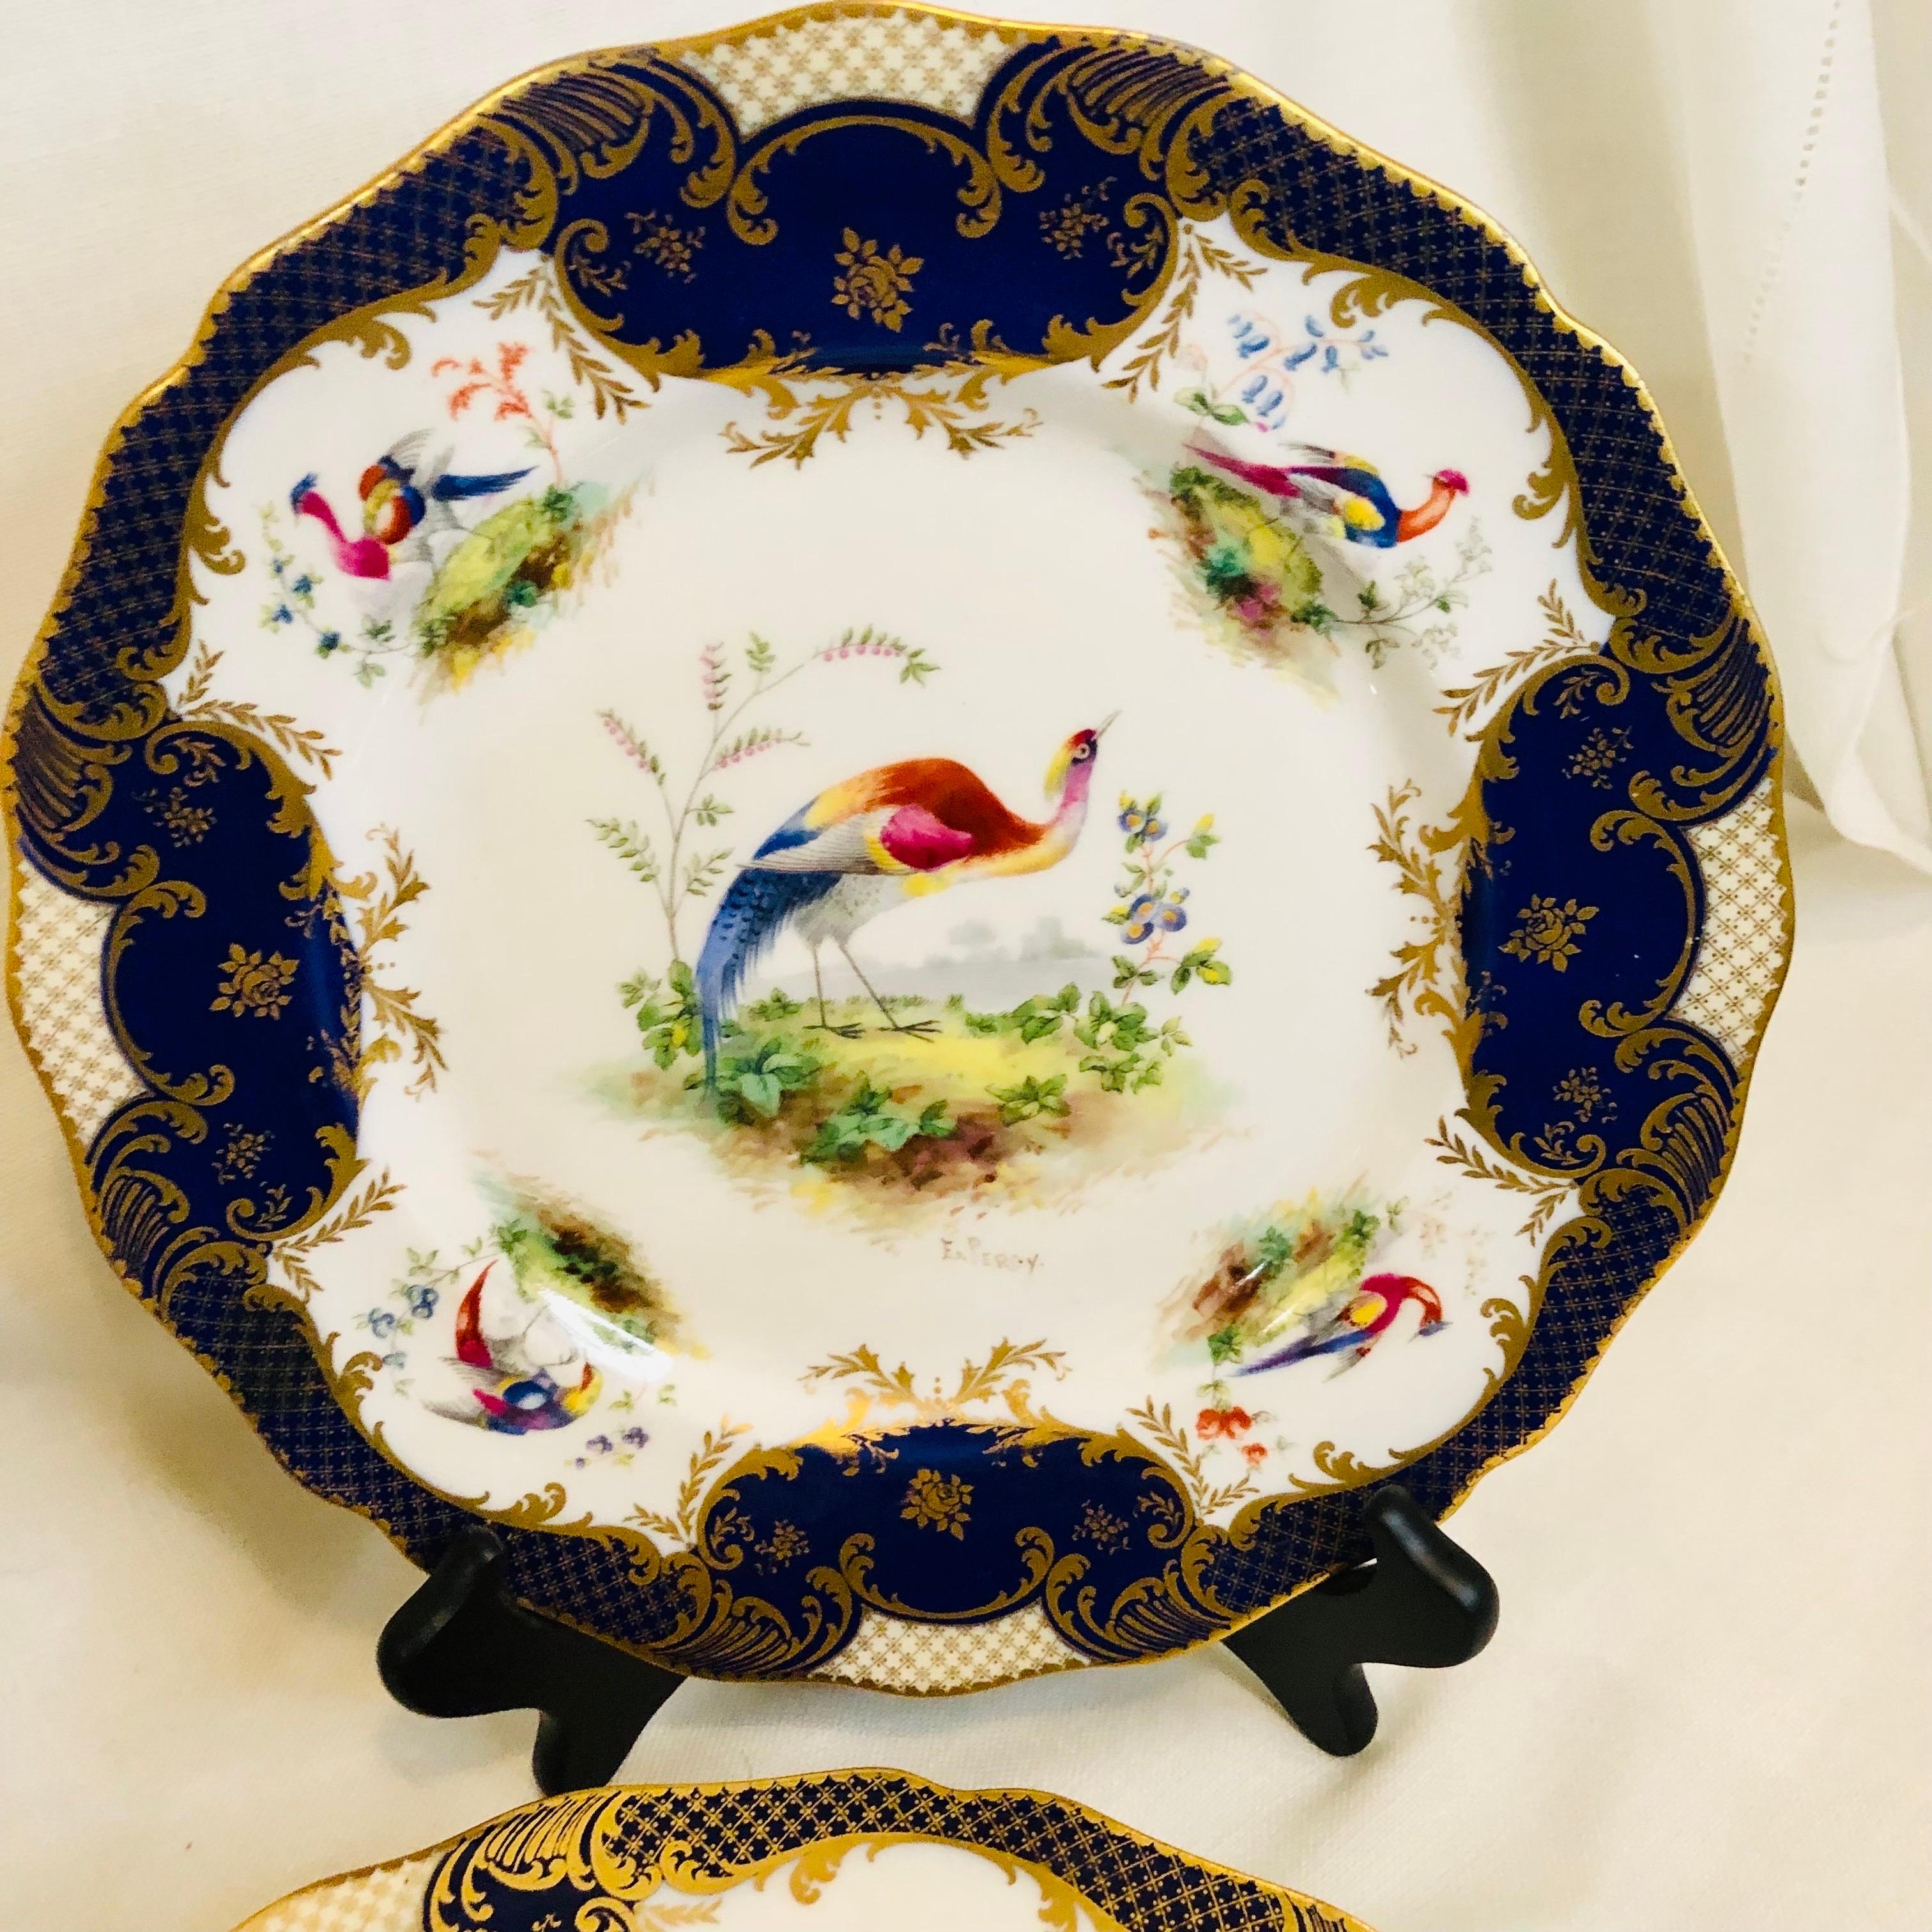 English Set of 6 Cobalt Royal Doulton Made for Tiffany Dinner Plates with Exotic Birds